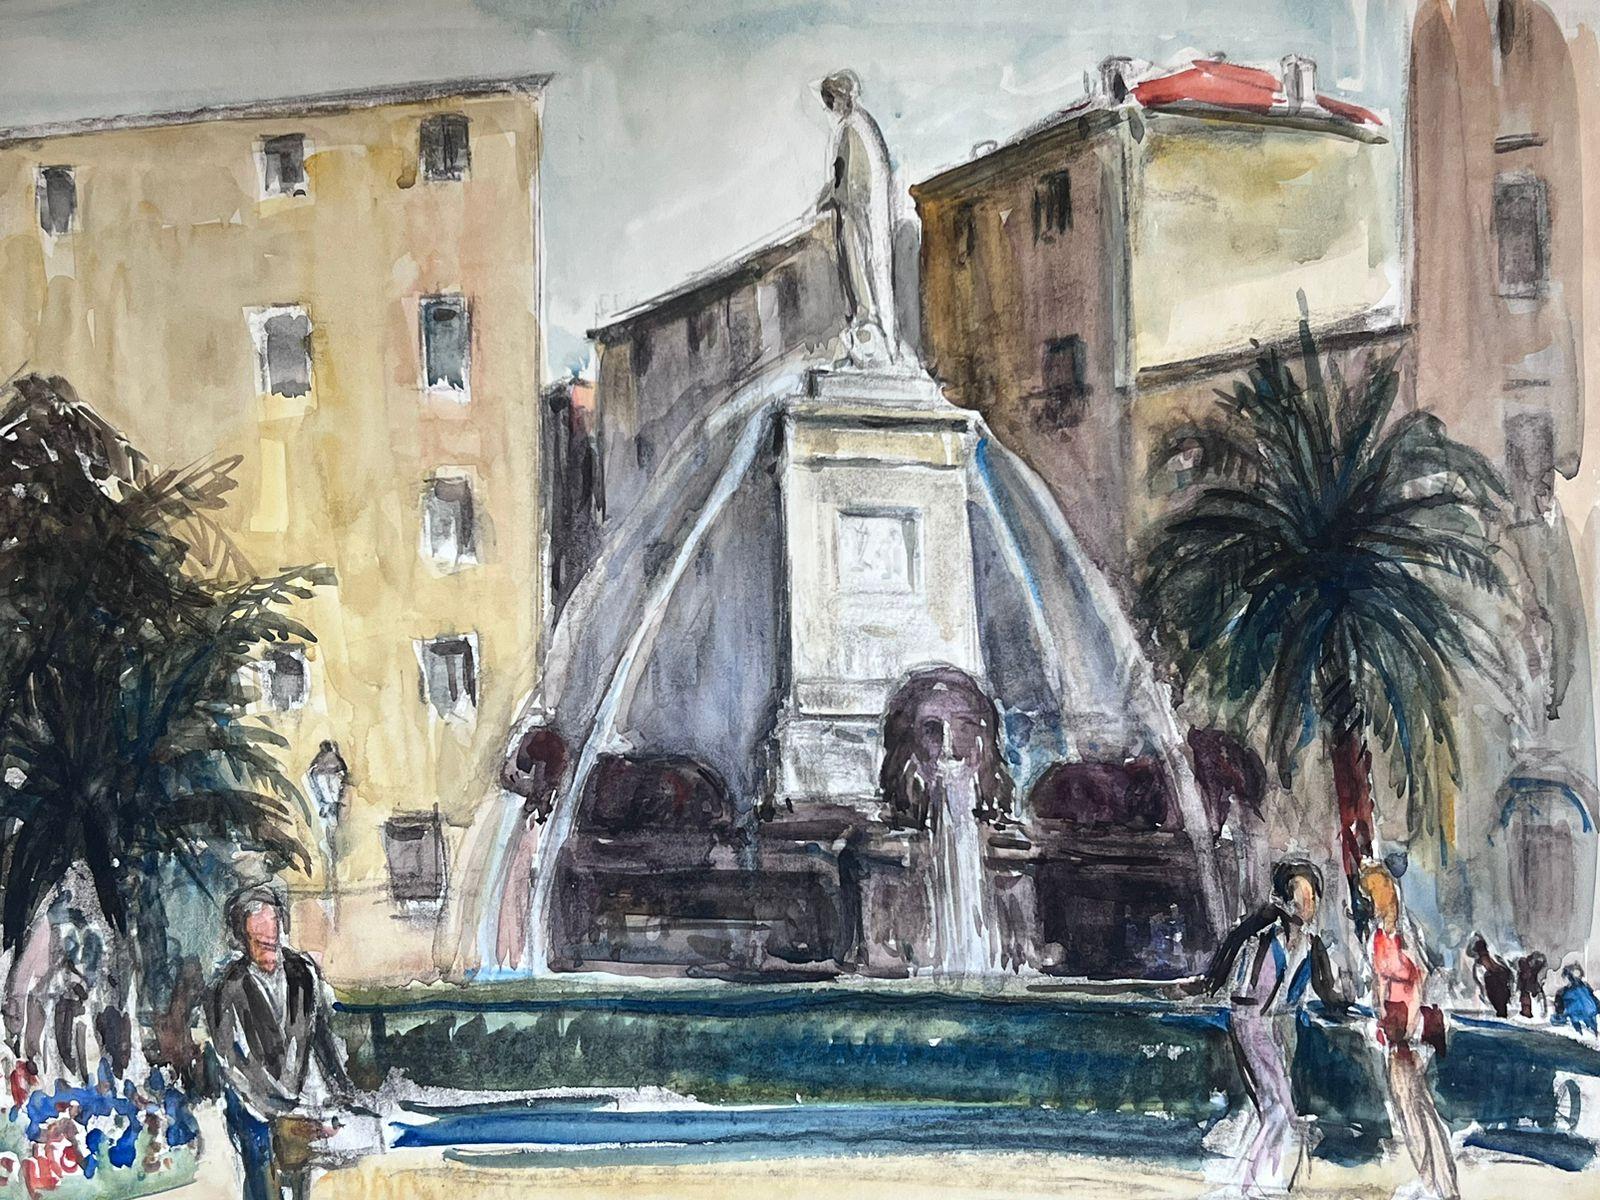 Jean La Forgue (French 1901-1975) watercolour on paper, unframed
painting: 17.75 x 25 inches
provenance: the artists estate, France
condition: very good and sound condition; there are minor age related marks and stains to the surface simply caused